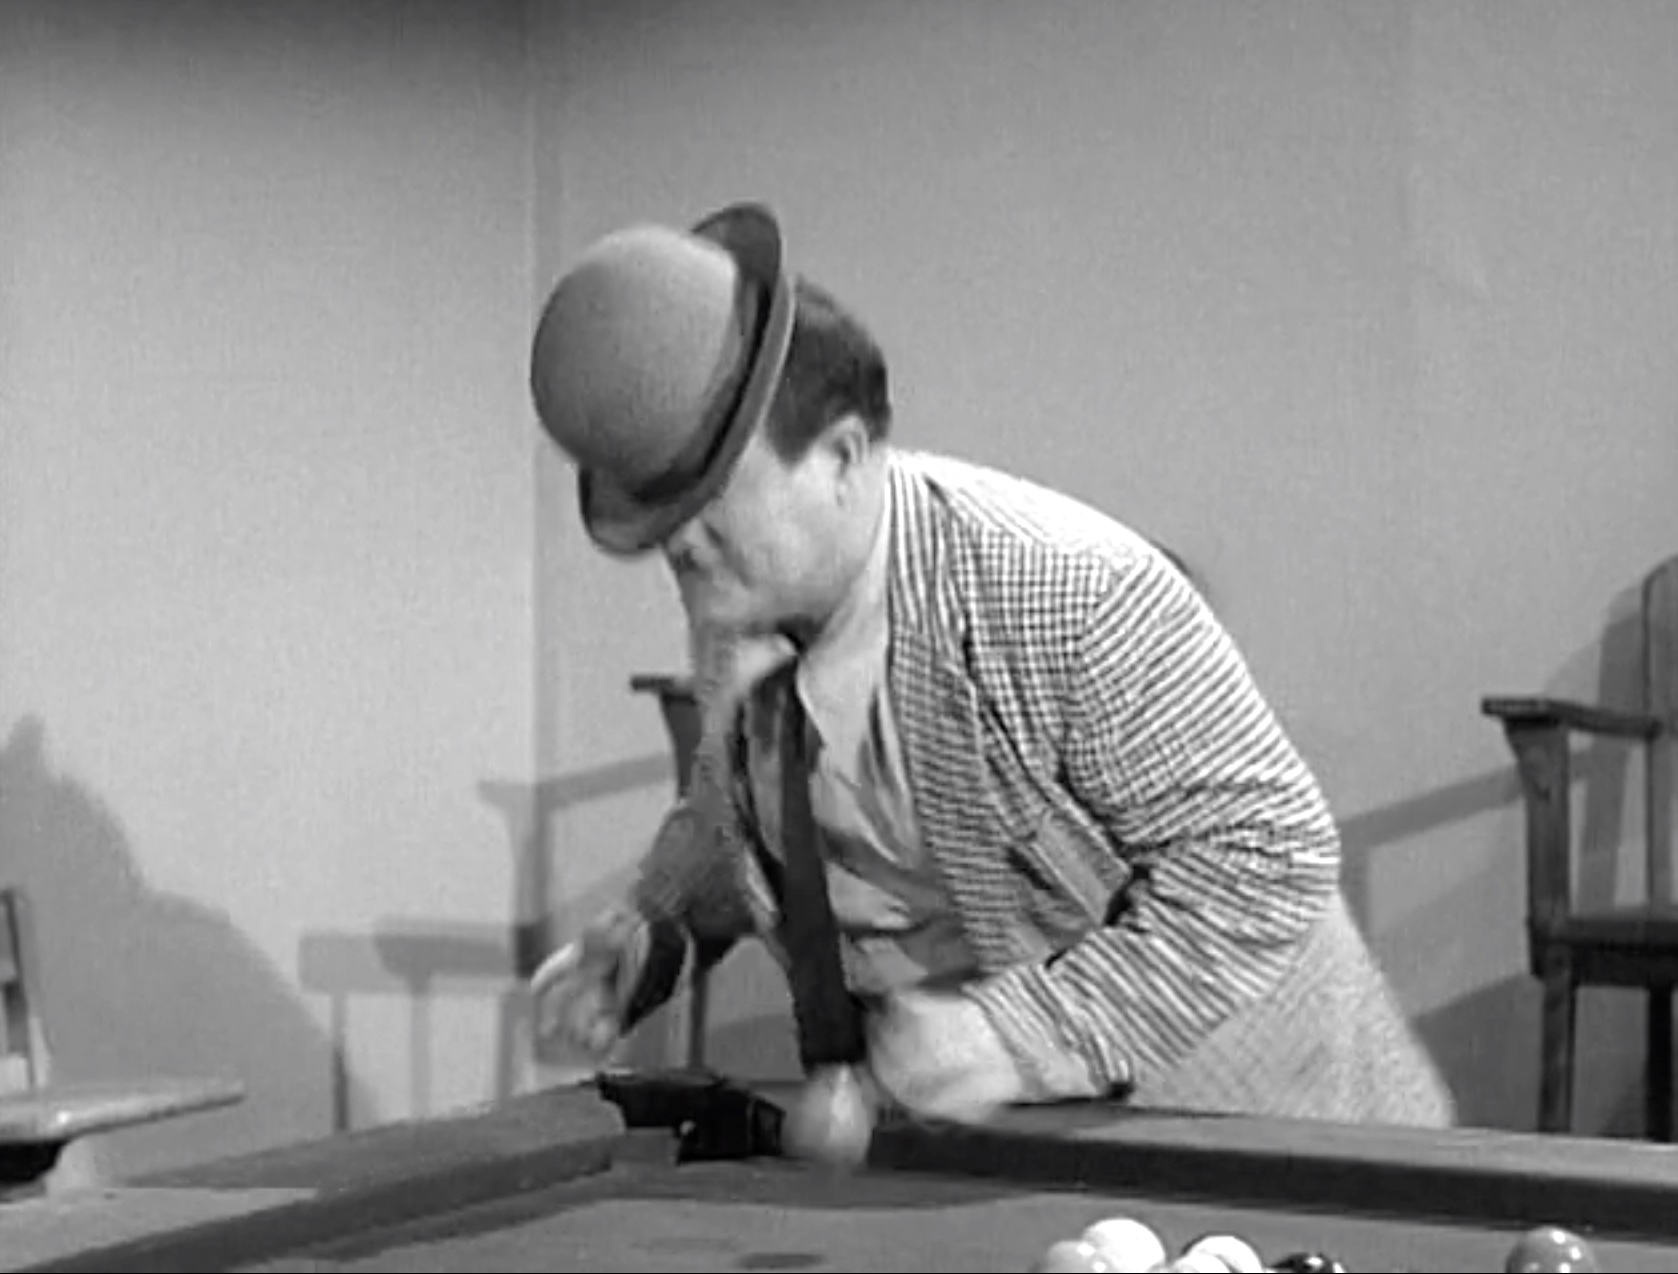 Lou Costello keeps getting hit in the face with a pool ball in "Las Vegas"